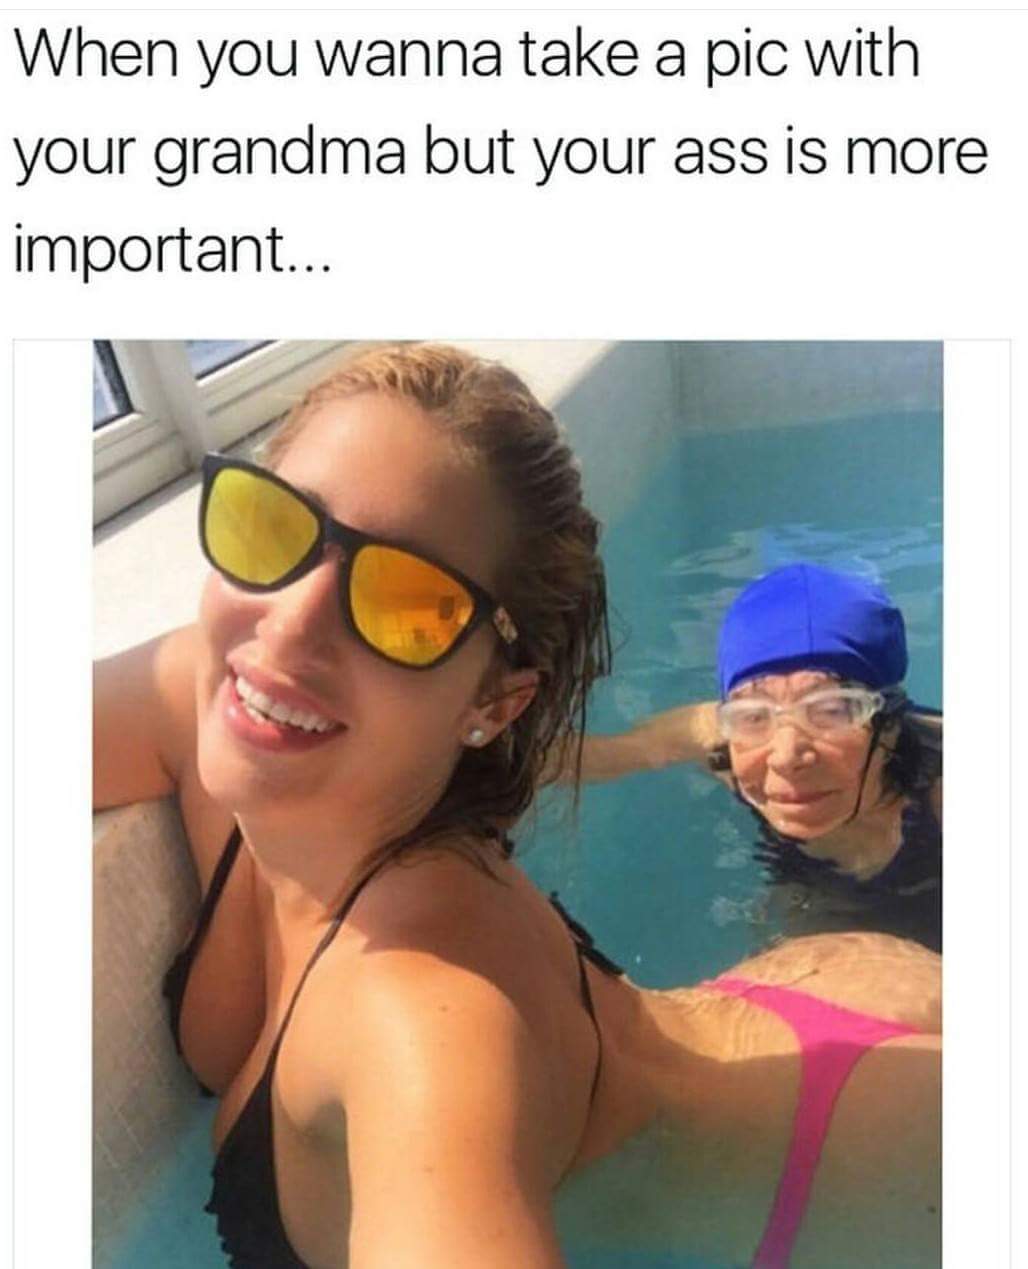 Tuesday meme about taking a butt selfie with grandma